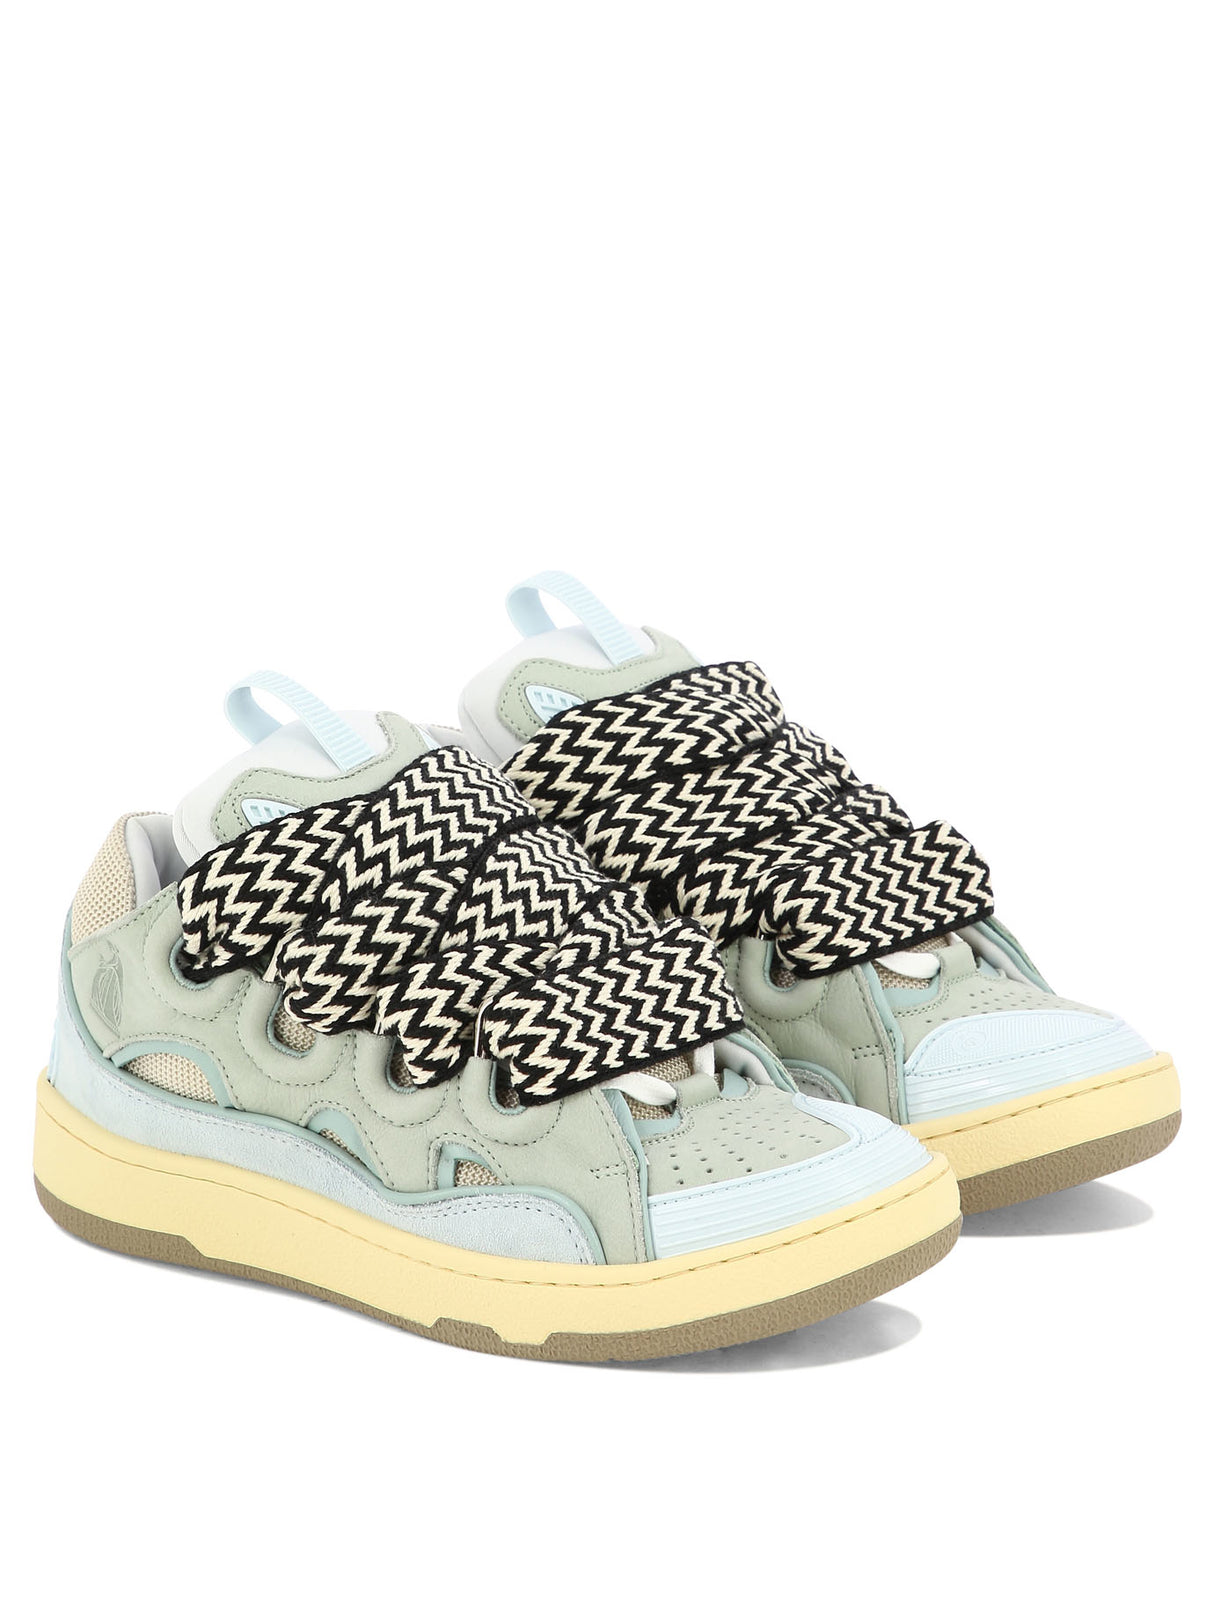 LANVIN Light Blue Quilted Sneakers for Women